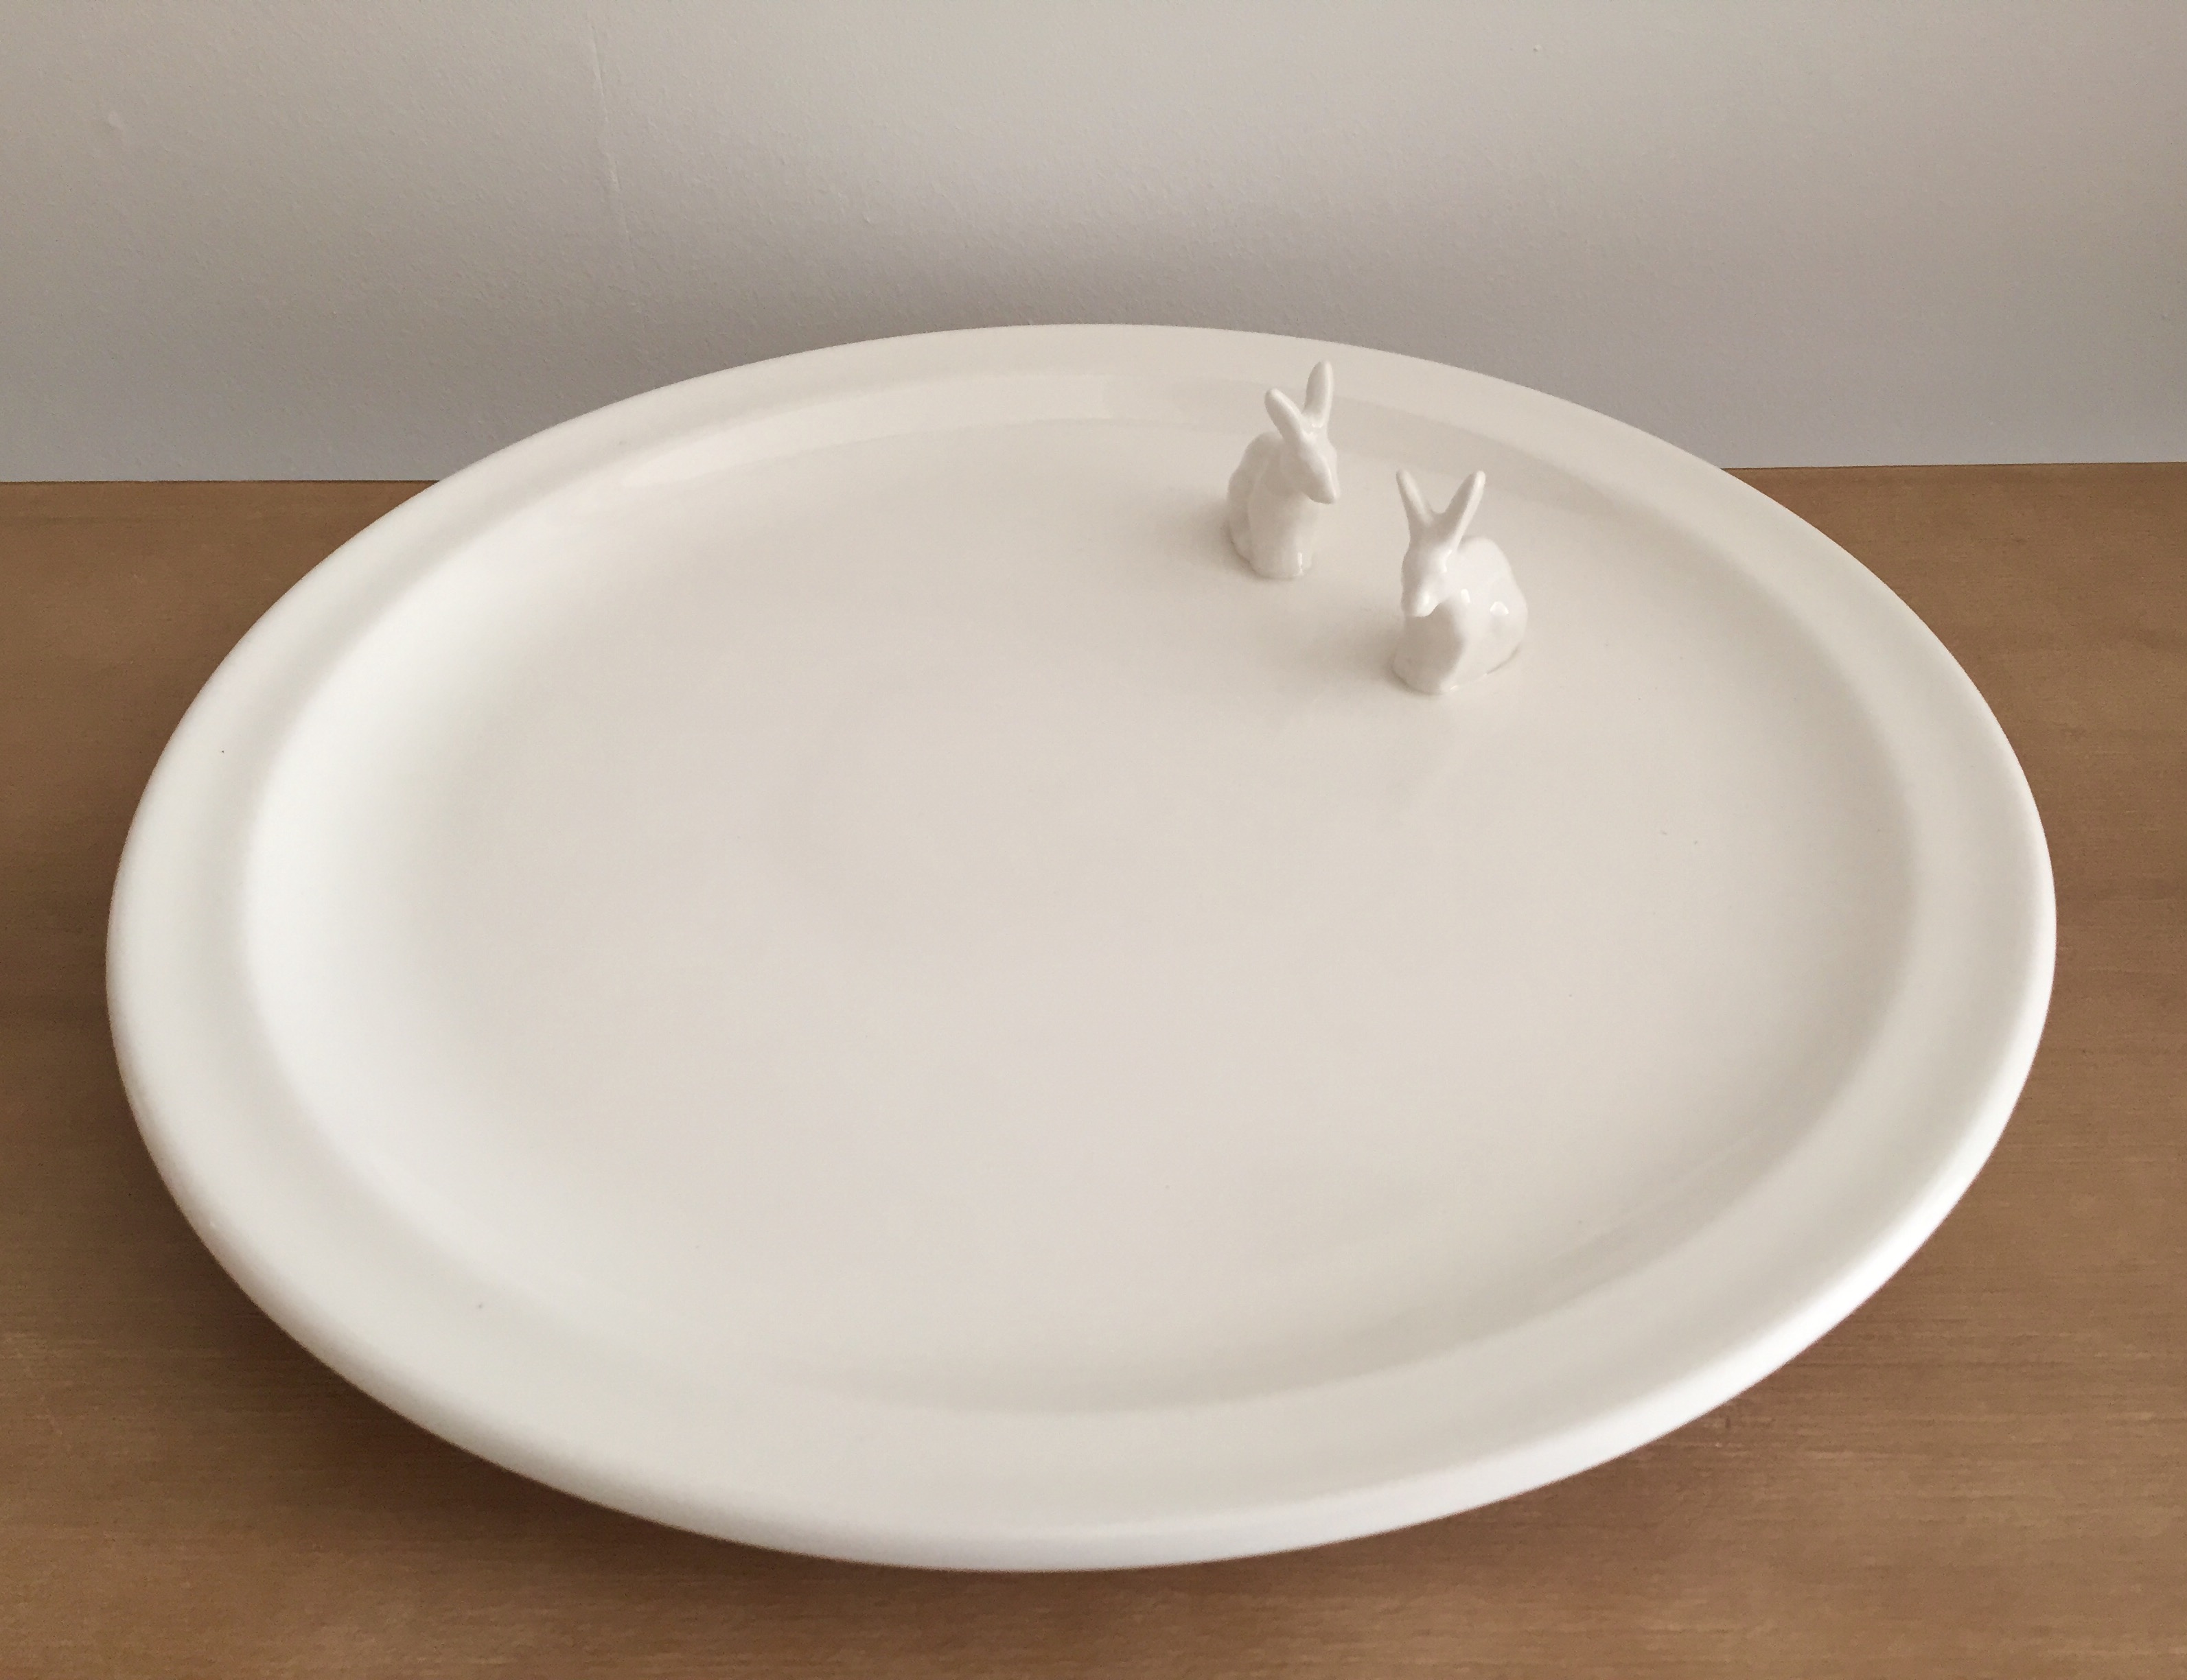 Round ceramic plate with rabbits